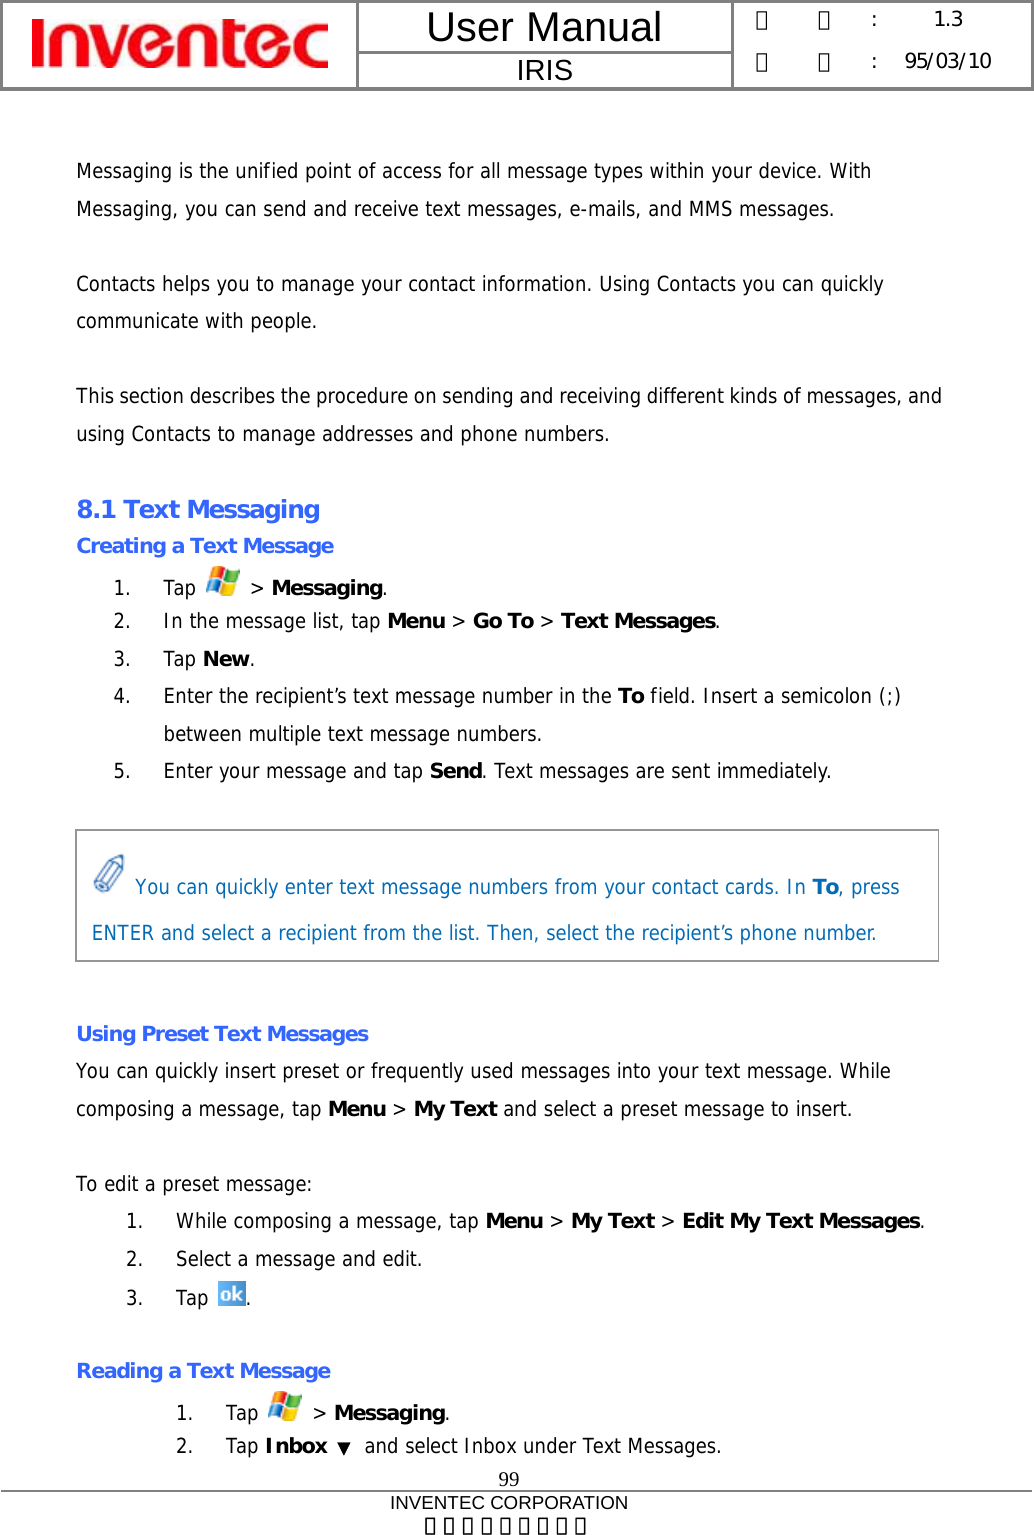 User Manual  IRIS 版    本 :  1.3 日    期 : 95/03/10  99 INVENTEC CORPORATION 英業達股份有限公司   Messaging is the unified point of access for all message types within your device. With Messaging, you can send and receive text messages, e-mails, and MMS messages.  Contacts helps you to manage your contact information. Using Contacts you can quickly communicate with people.  This section describes the procedure on sending and receiving different kinds of messages, and using Contacts to manage addresses and phone numbers.  8.1 Text Messaging Creating a Text Message 1. Tap   &gt; Messaging. 2. In the message list, tap Menu &gt; Go To &gt; Text Messages. 3. Tap New. 4. Enter the recipient’s text message number in the To field. Insert a semicolon (;) between multiple text message numbers. 5. Enter your message and tap Send. Text messages are sent immediately.       Using Preset Text Messages You can quickly insert preset or frequently used messages into your text message. While composing a message, tap Menu &gt; My Text and select a preset message to insert.  To edit a preset message: 1. While composing a message, tap Menu &gt; My Text &gt; Edit My Text Messages. 2. Select a message and edit. 3. Tap  .  Reading a Text Message 1. Tap   &gt; Messaging. 2. Tap Inbox  ▼ and select Inbox under Text Messages.  You can quickly enter text message numbers from your contact cards. In To, press ENTER and select a recipient from the list. Then, select the recipient’s phone number. 